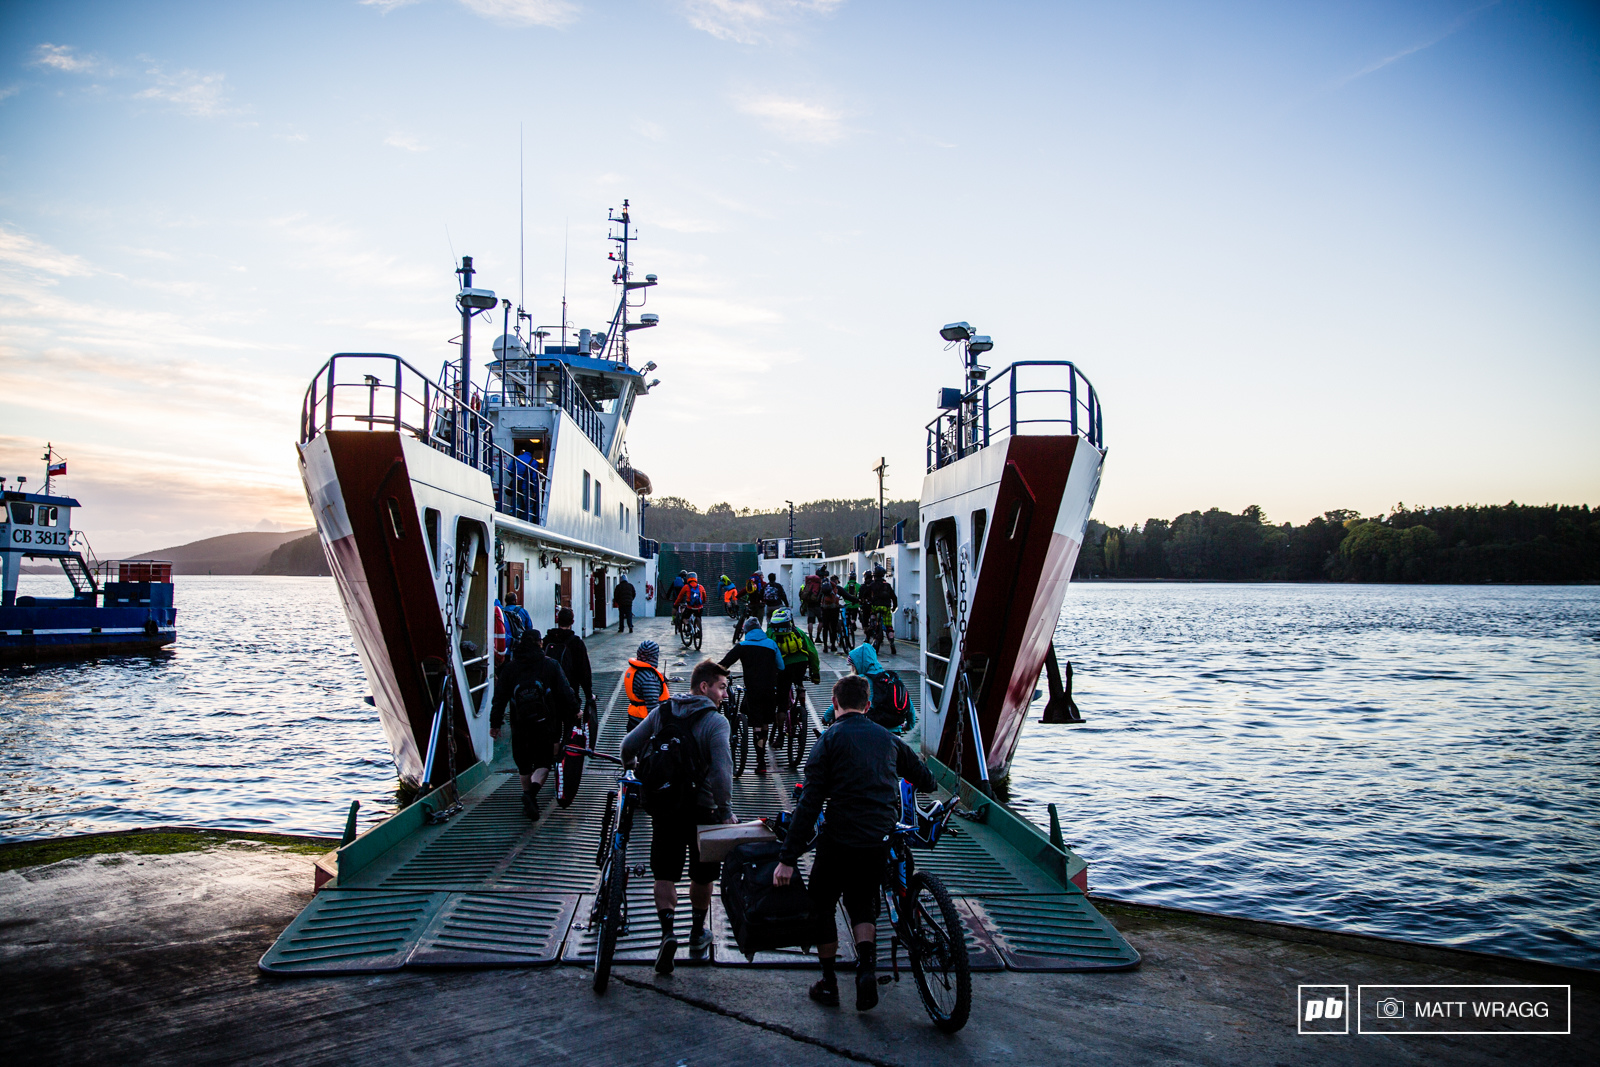 It all starts here - riders board the early morning ferry to Corral ready for practice to begin.